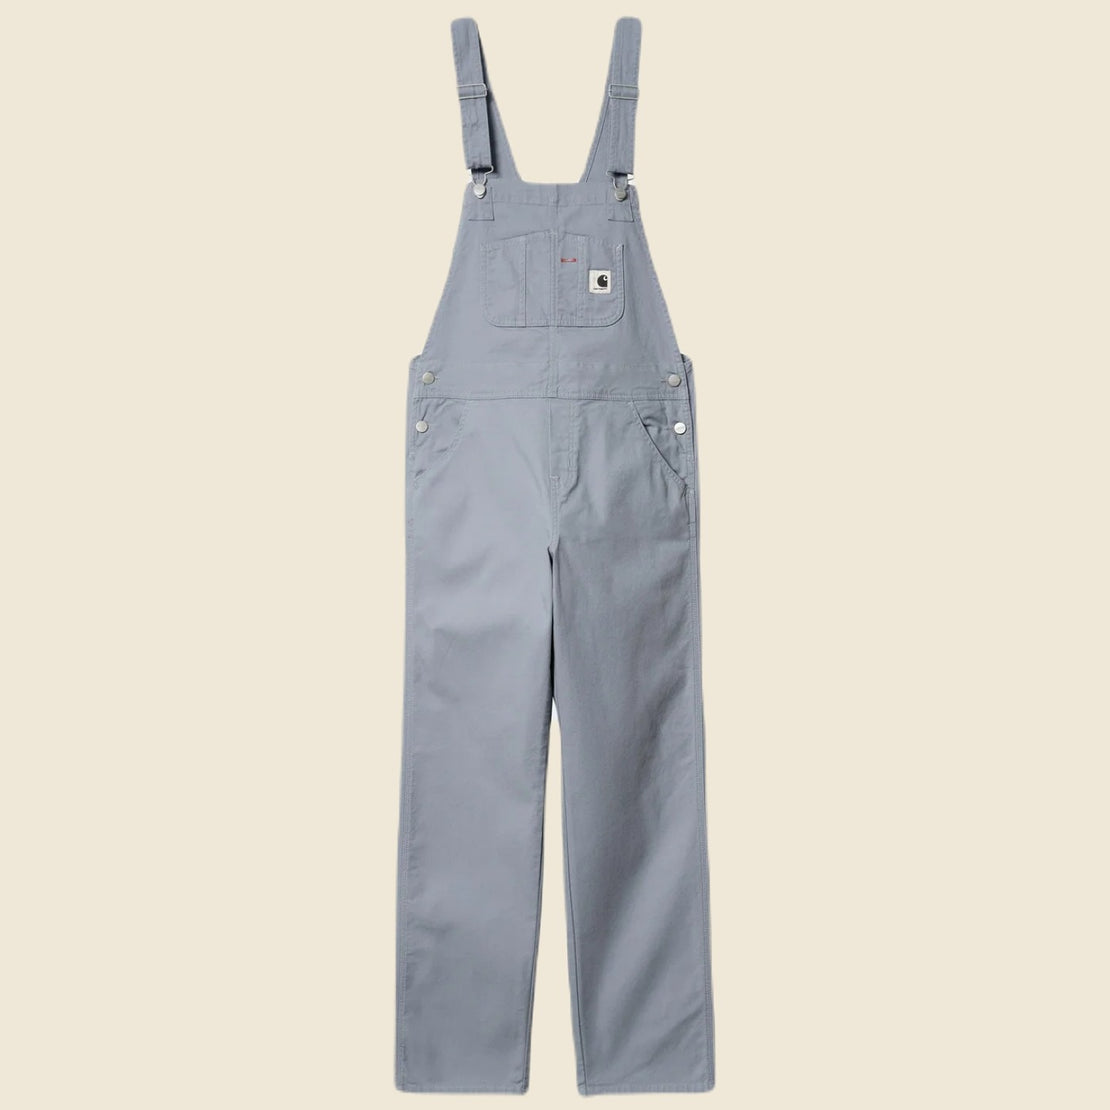 Carhartt WIP - W' Bib Overall Straight Rinsed Tobacco - Dungarees